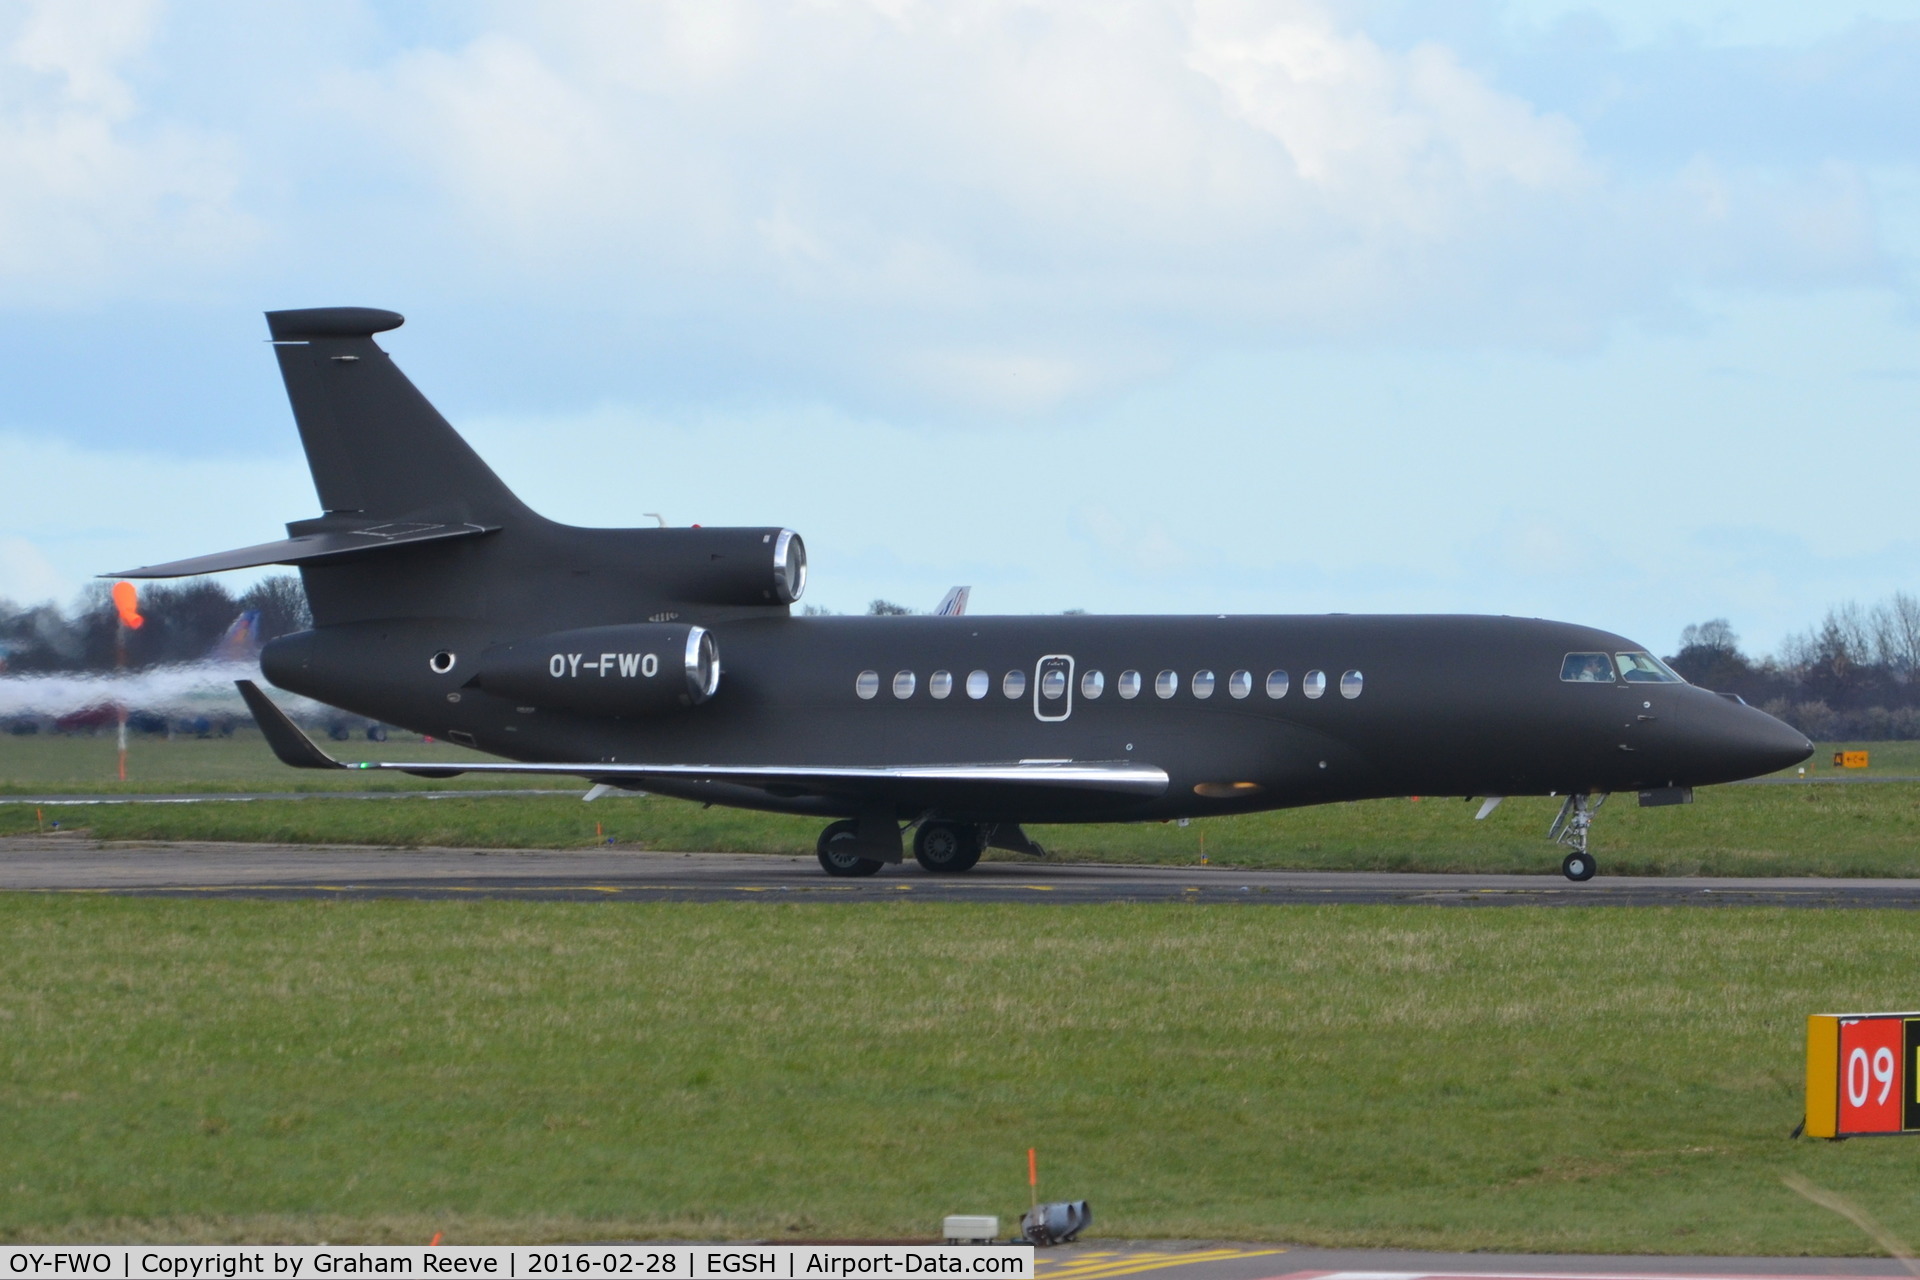 OY-FWO, 2013 Dassault Falcon 7X C/N 198, Just landed at Norwich.